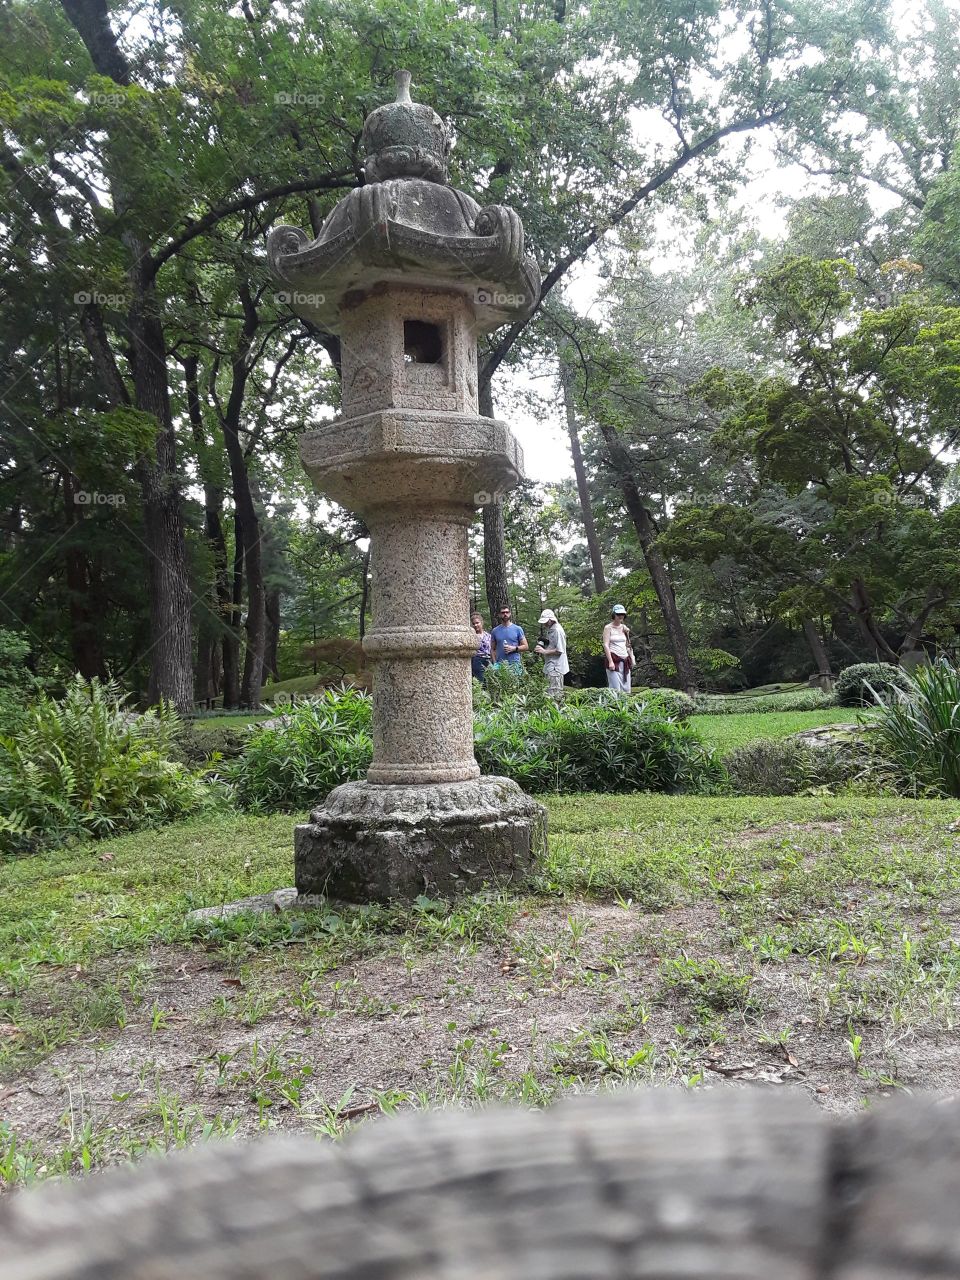 Cool birdhouse like statue at Maymont park in Richmond, Virginia.